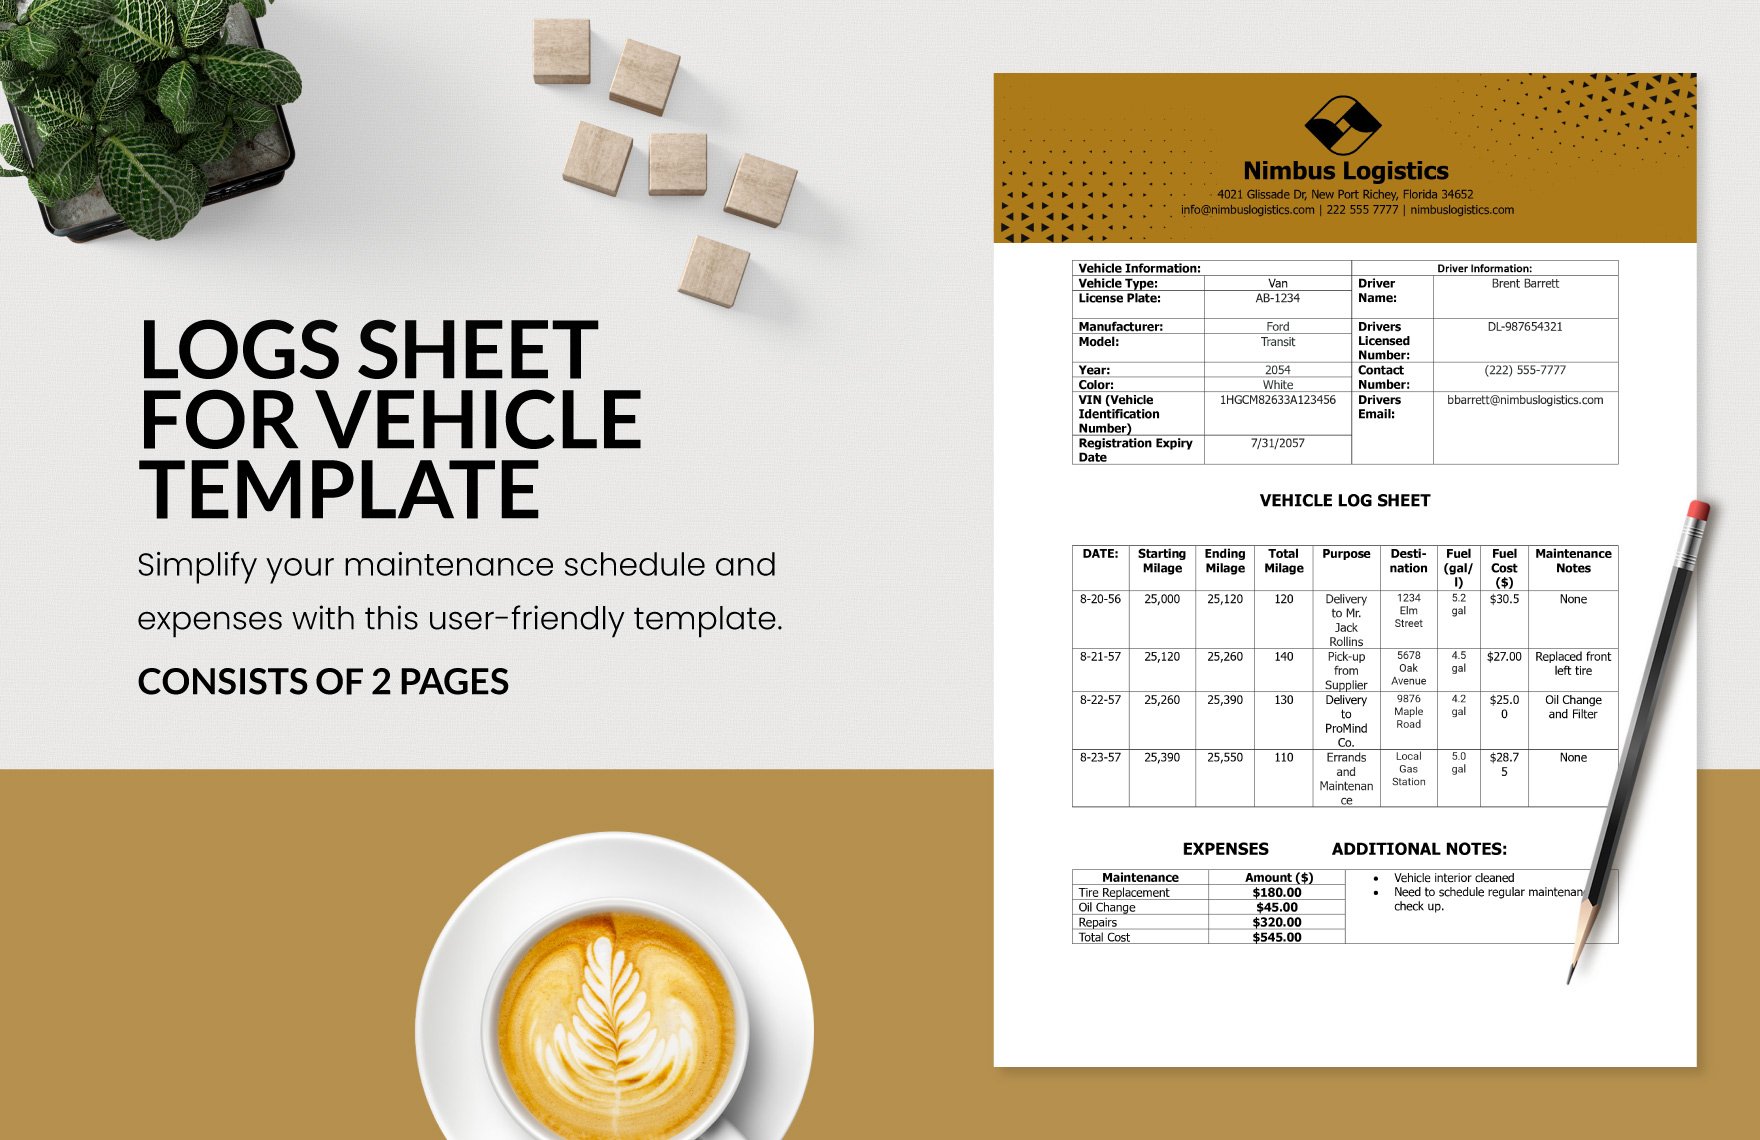 Log Sheet for Vehicle Template